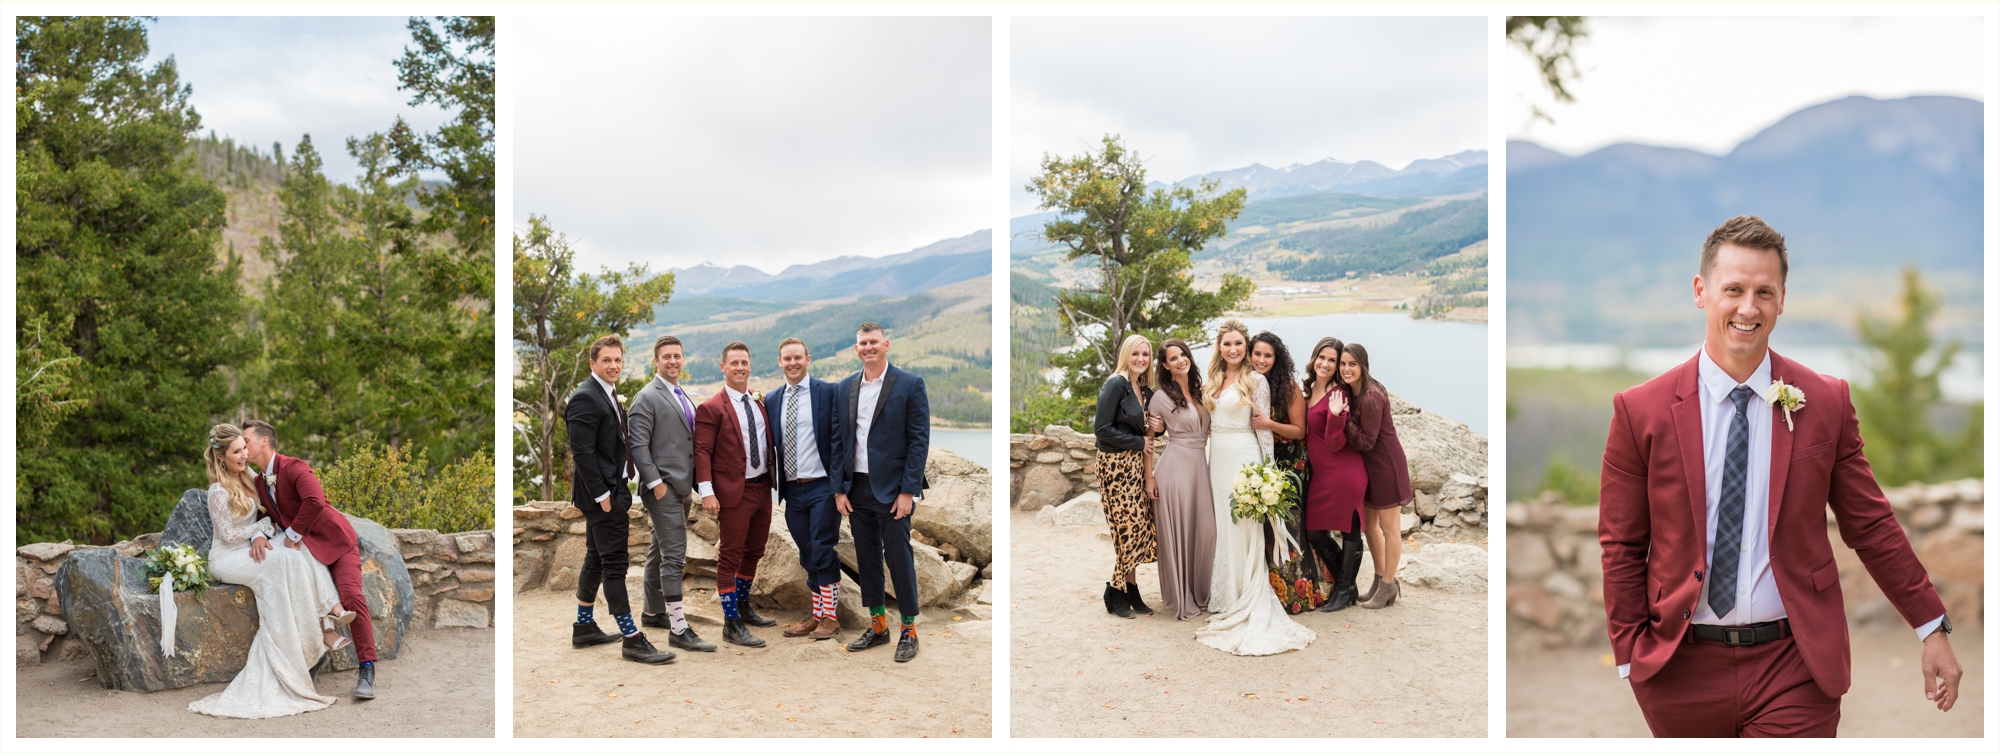 portraits with friends after sapphire point wedding ceremony in breckenridge colorado